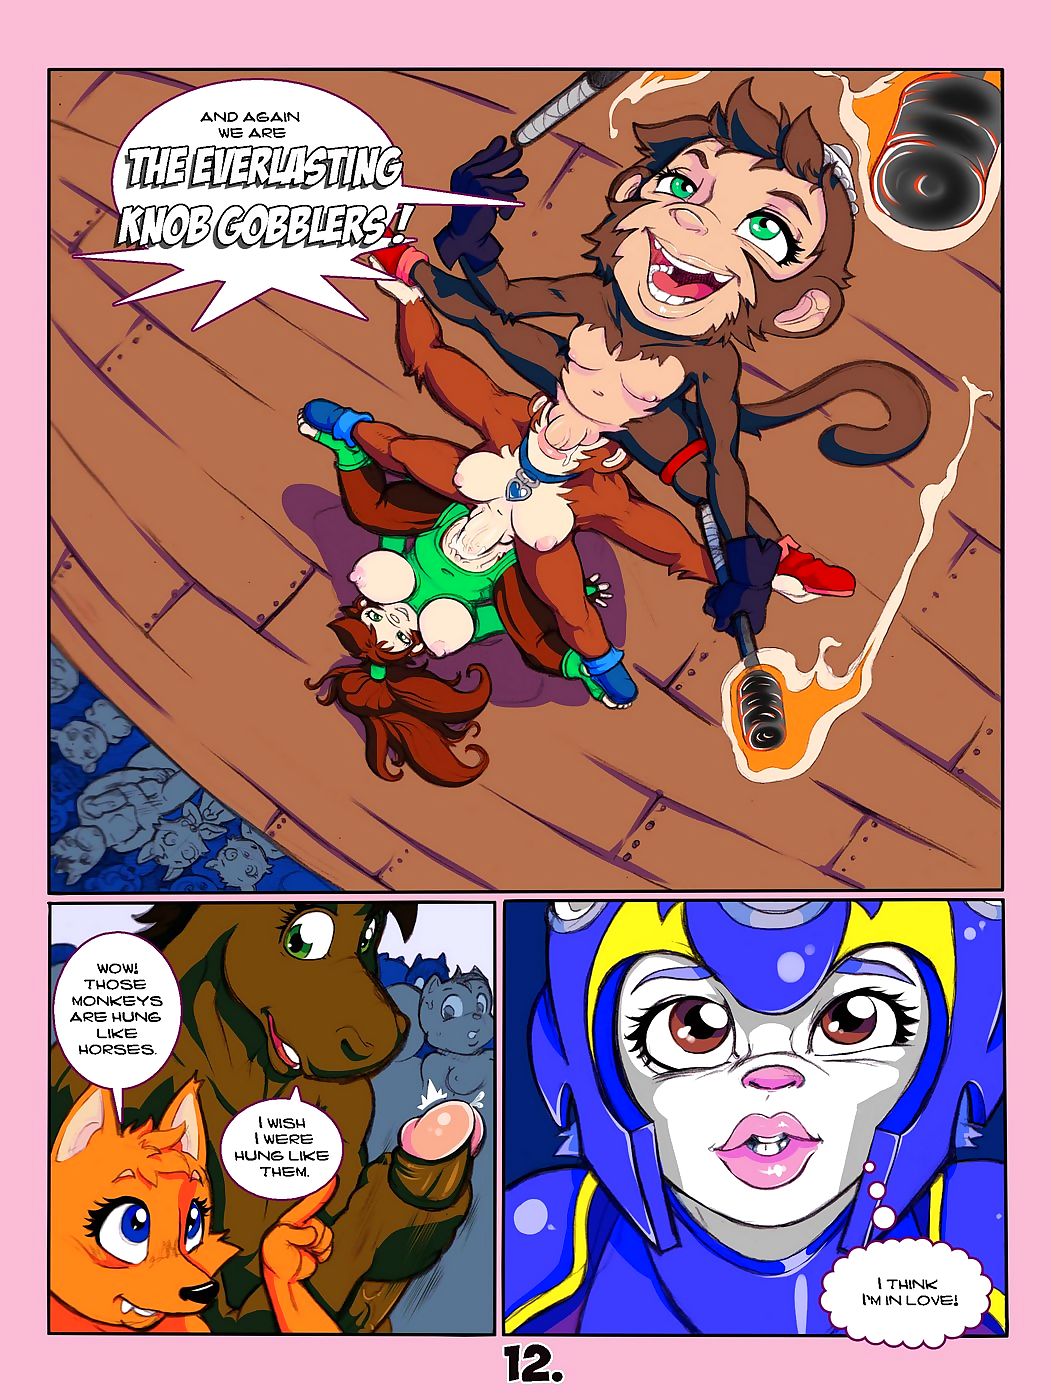 The Family That Plays Together page 1